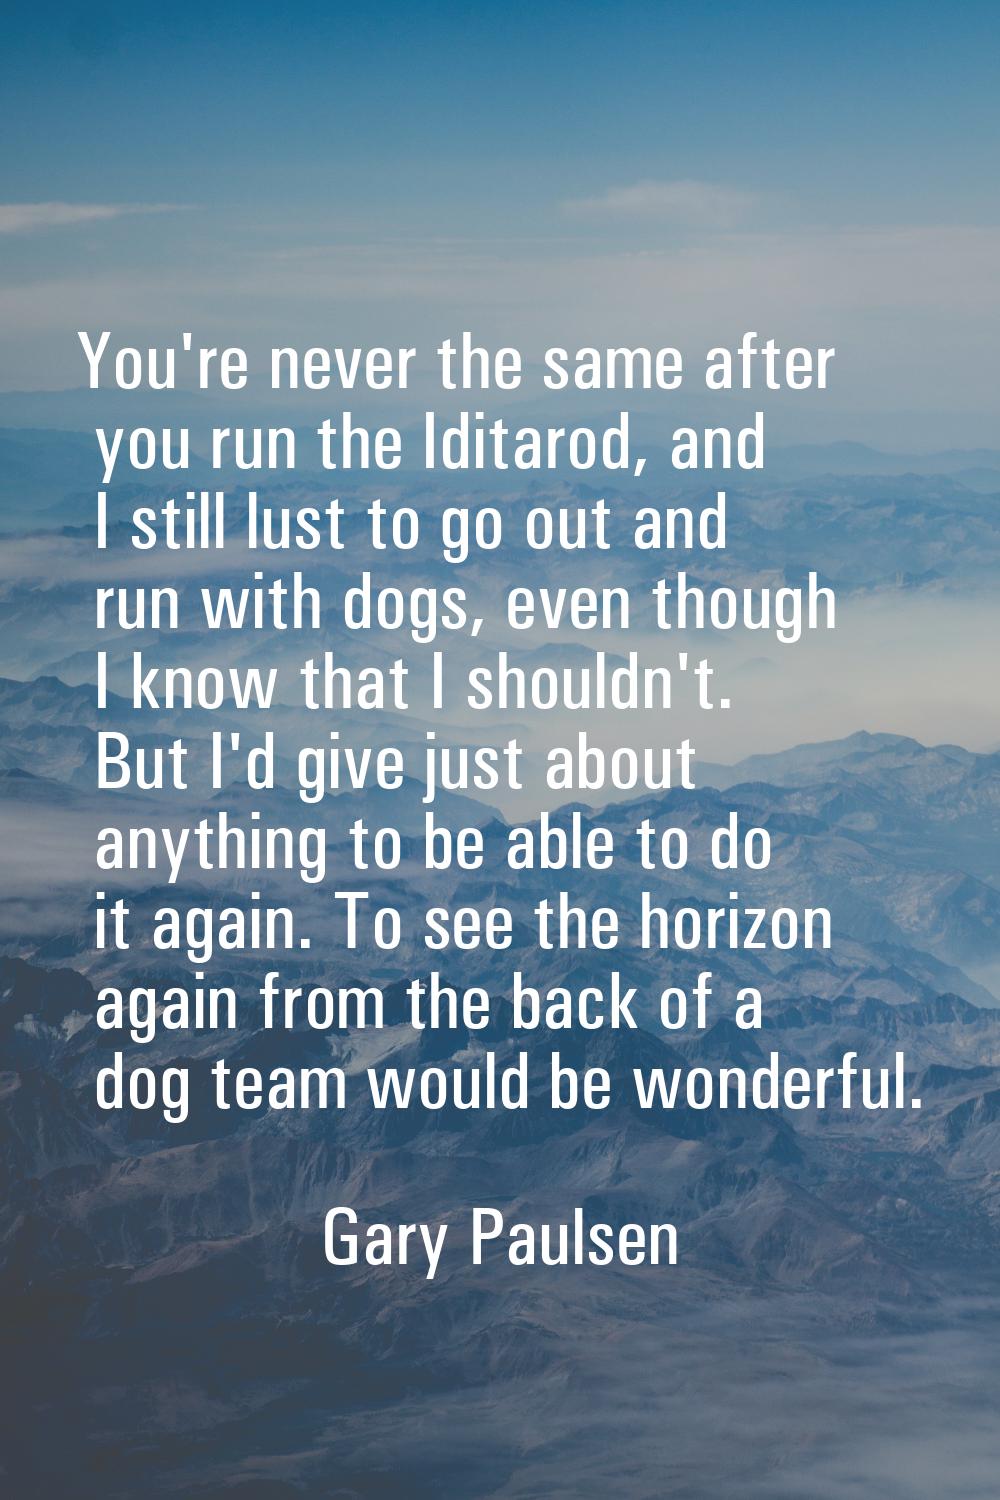 You're never the same after you run the Iditarod, and I still lust to go out and run with dogs, eve